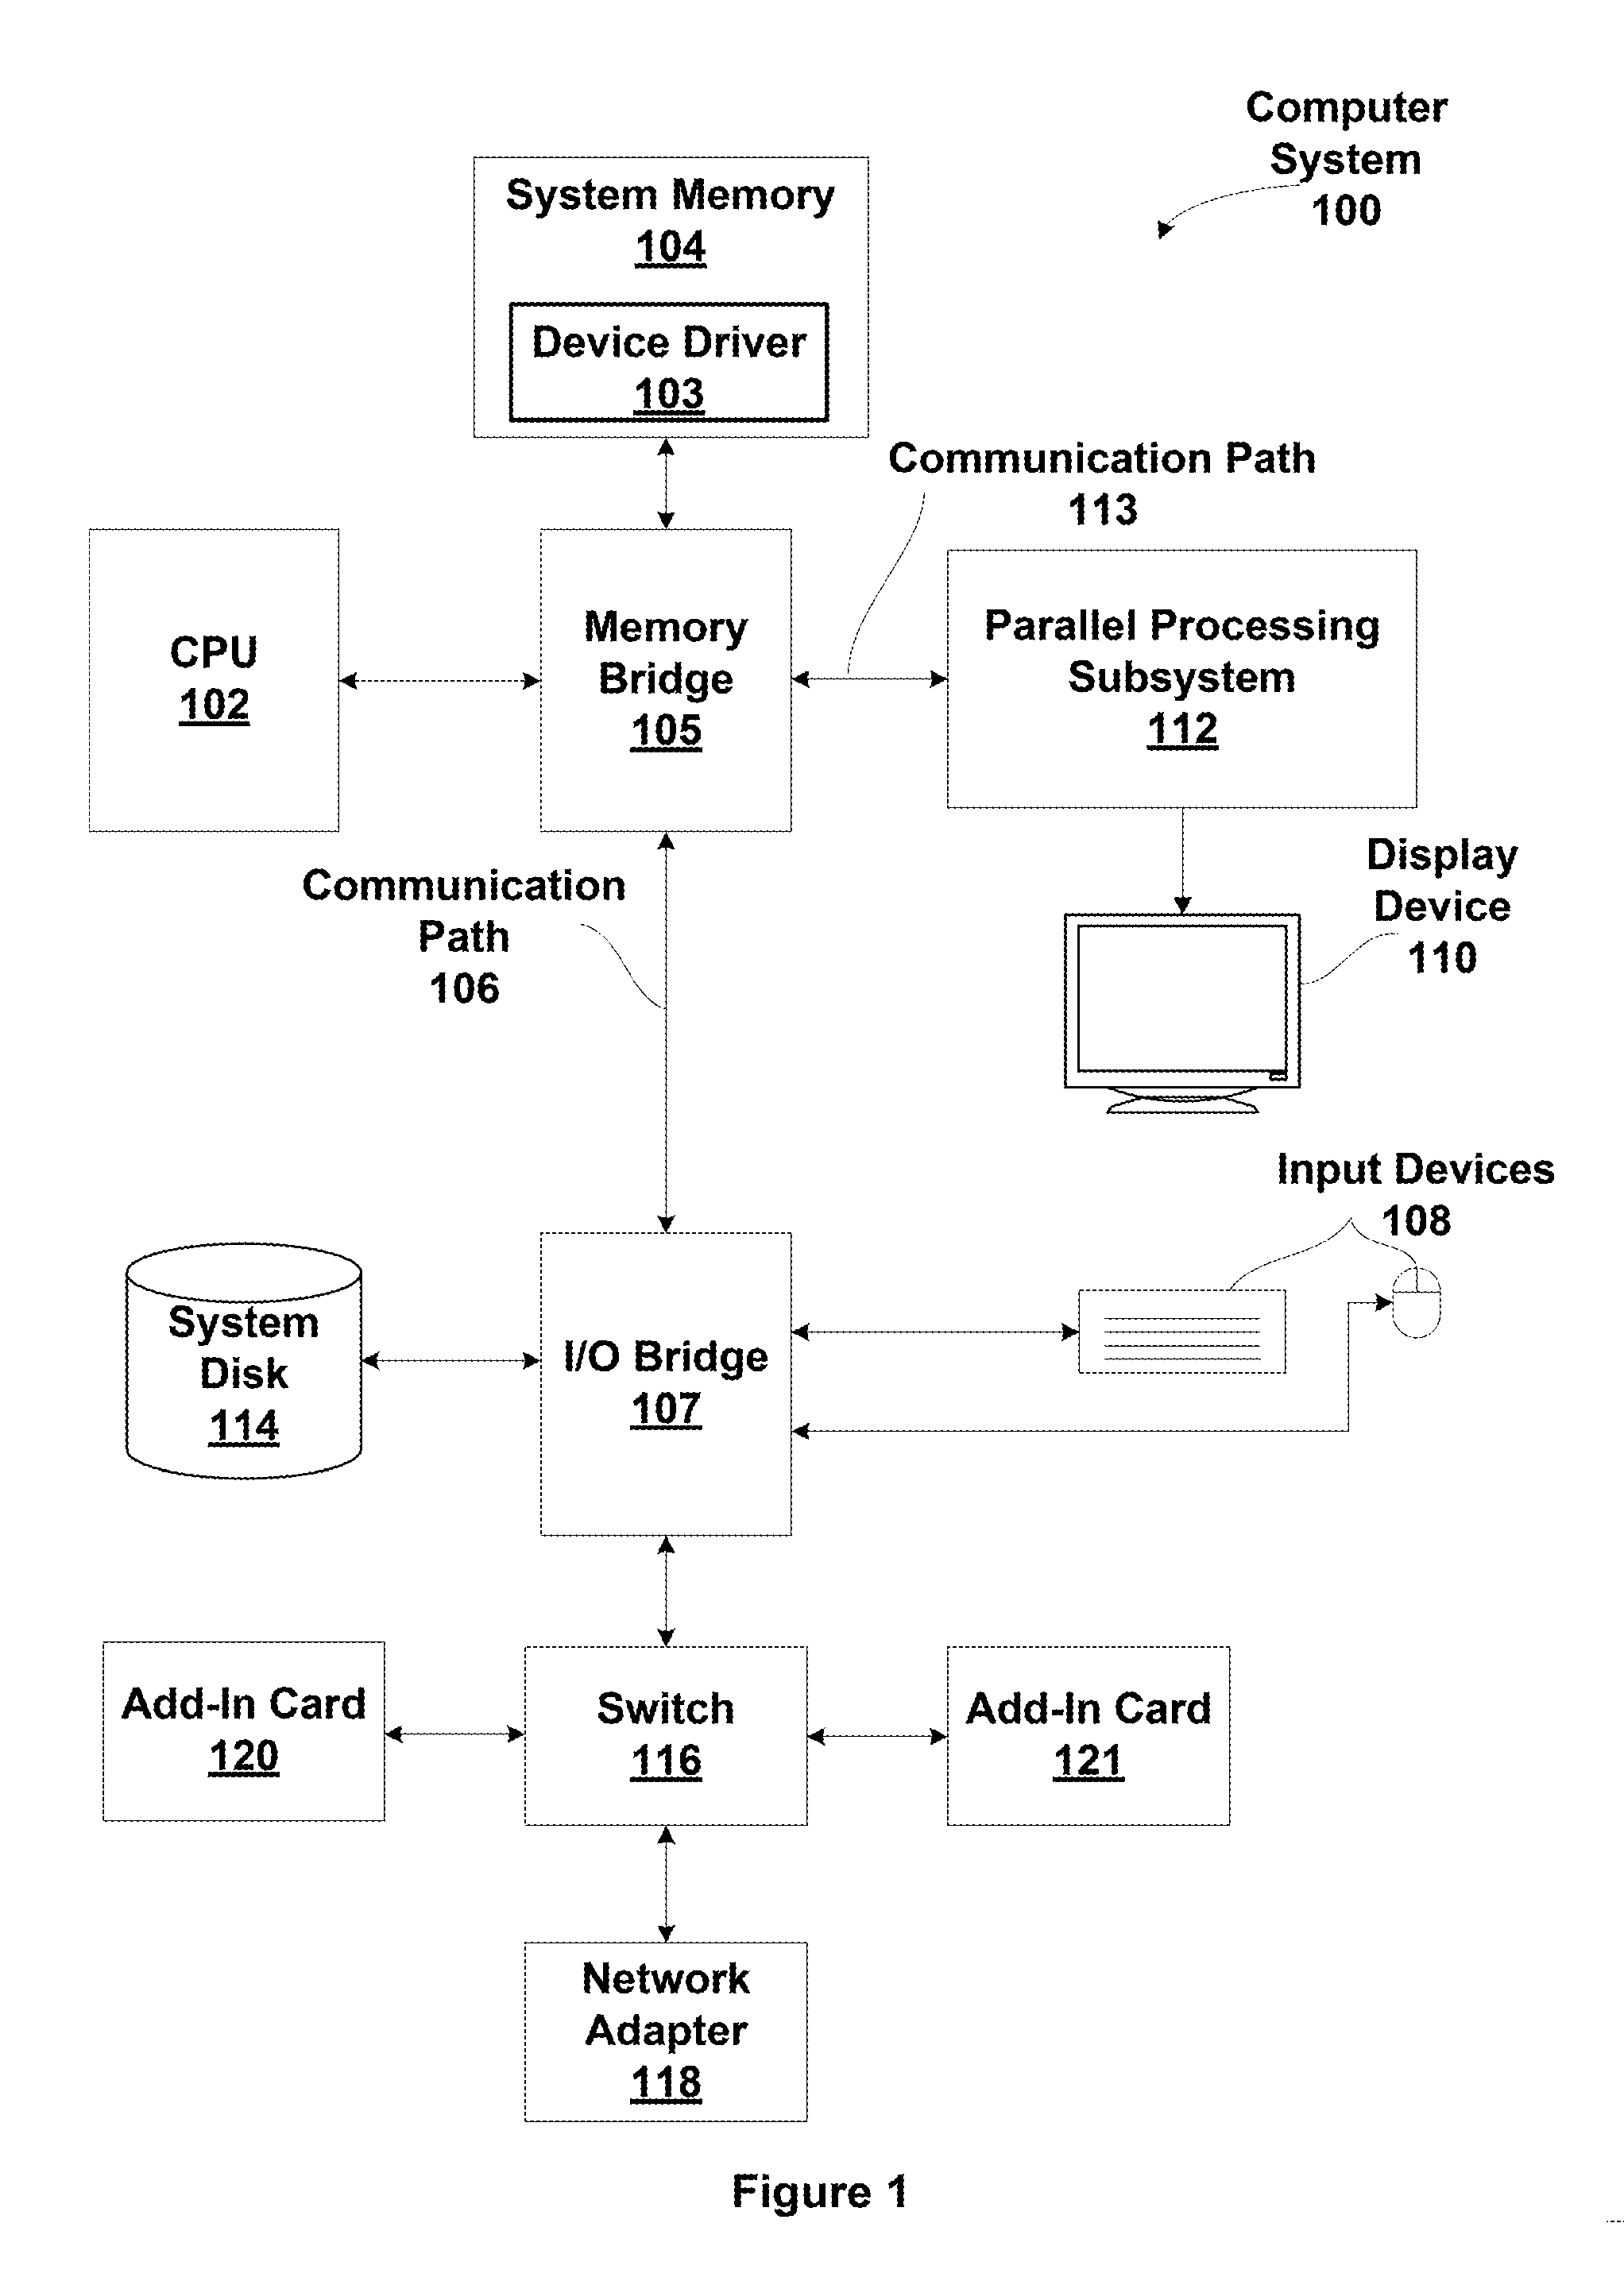 Dynamic bank mode addressing for memory access